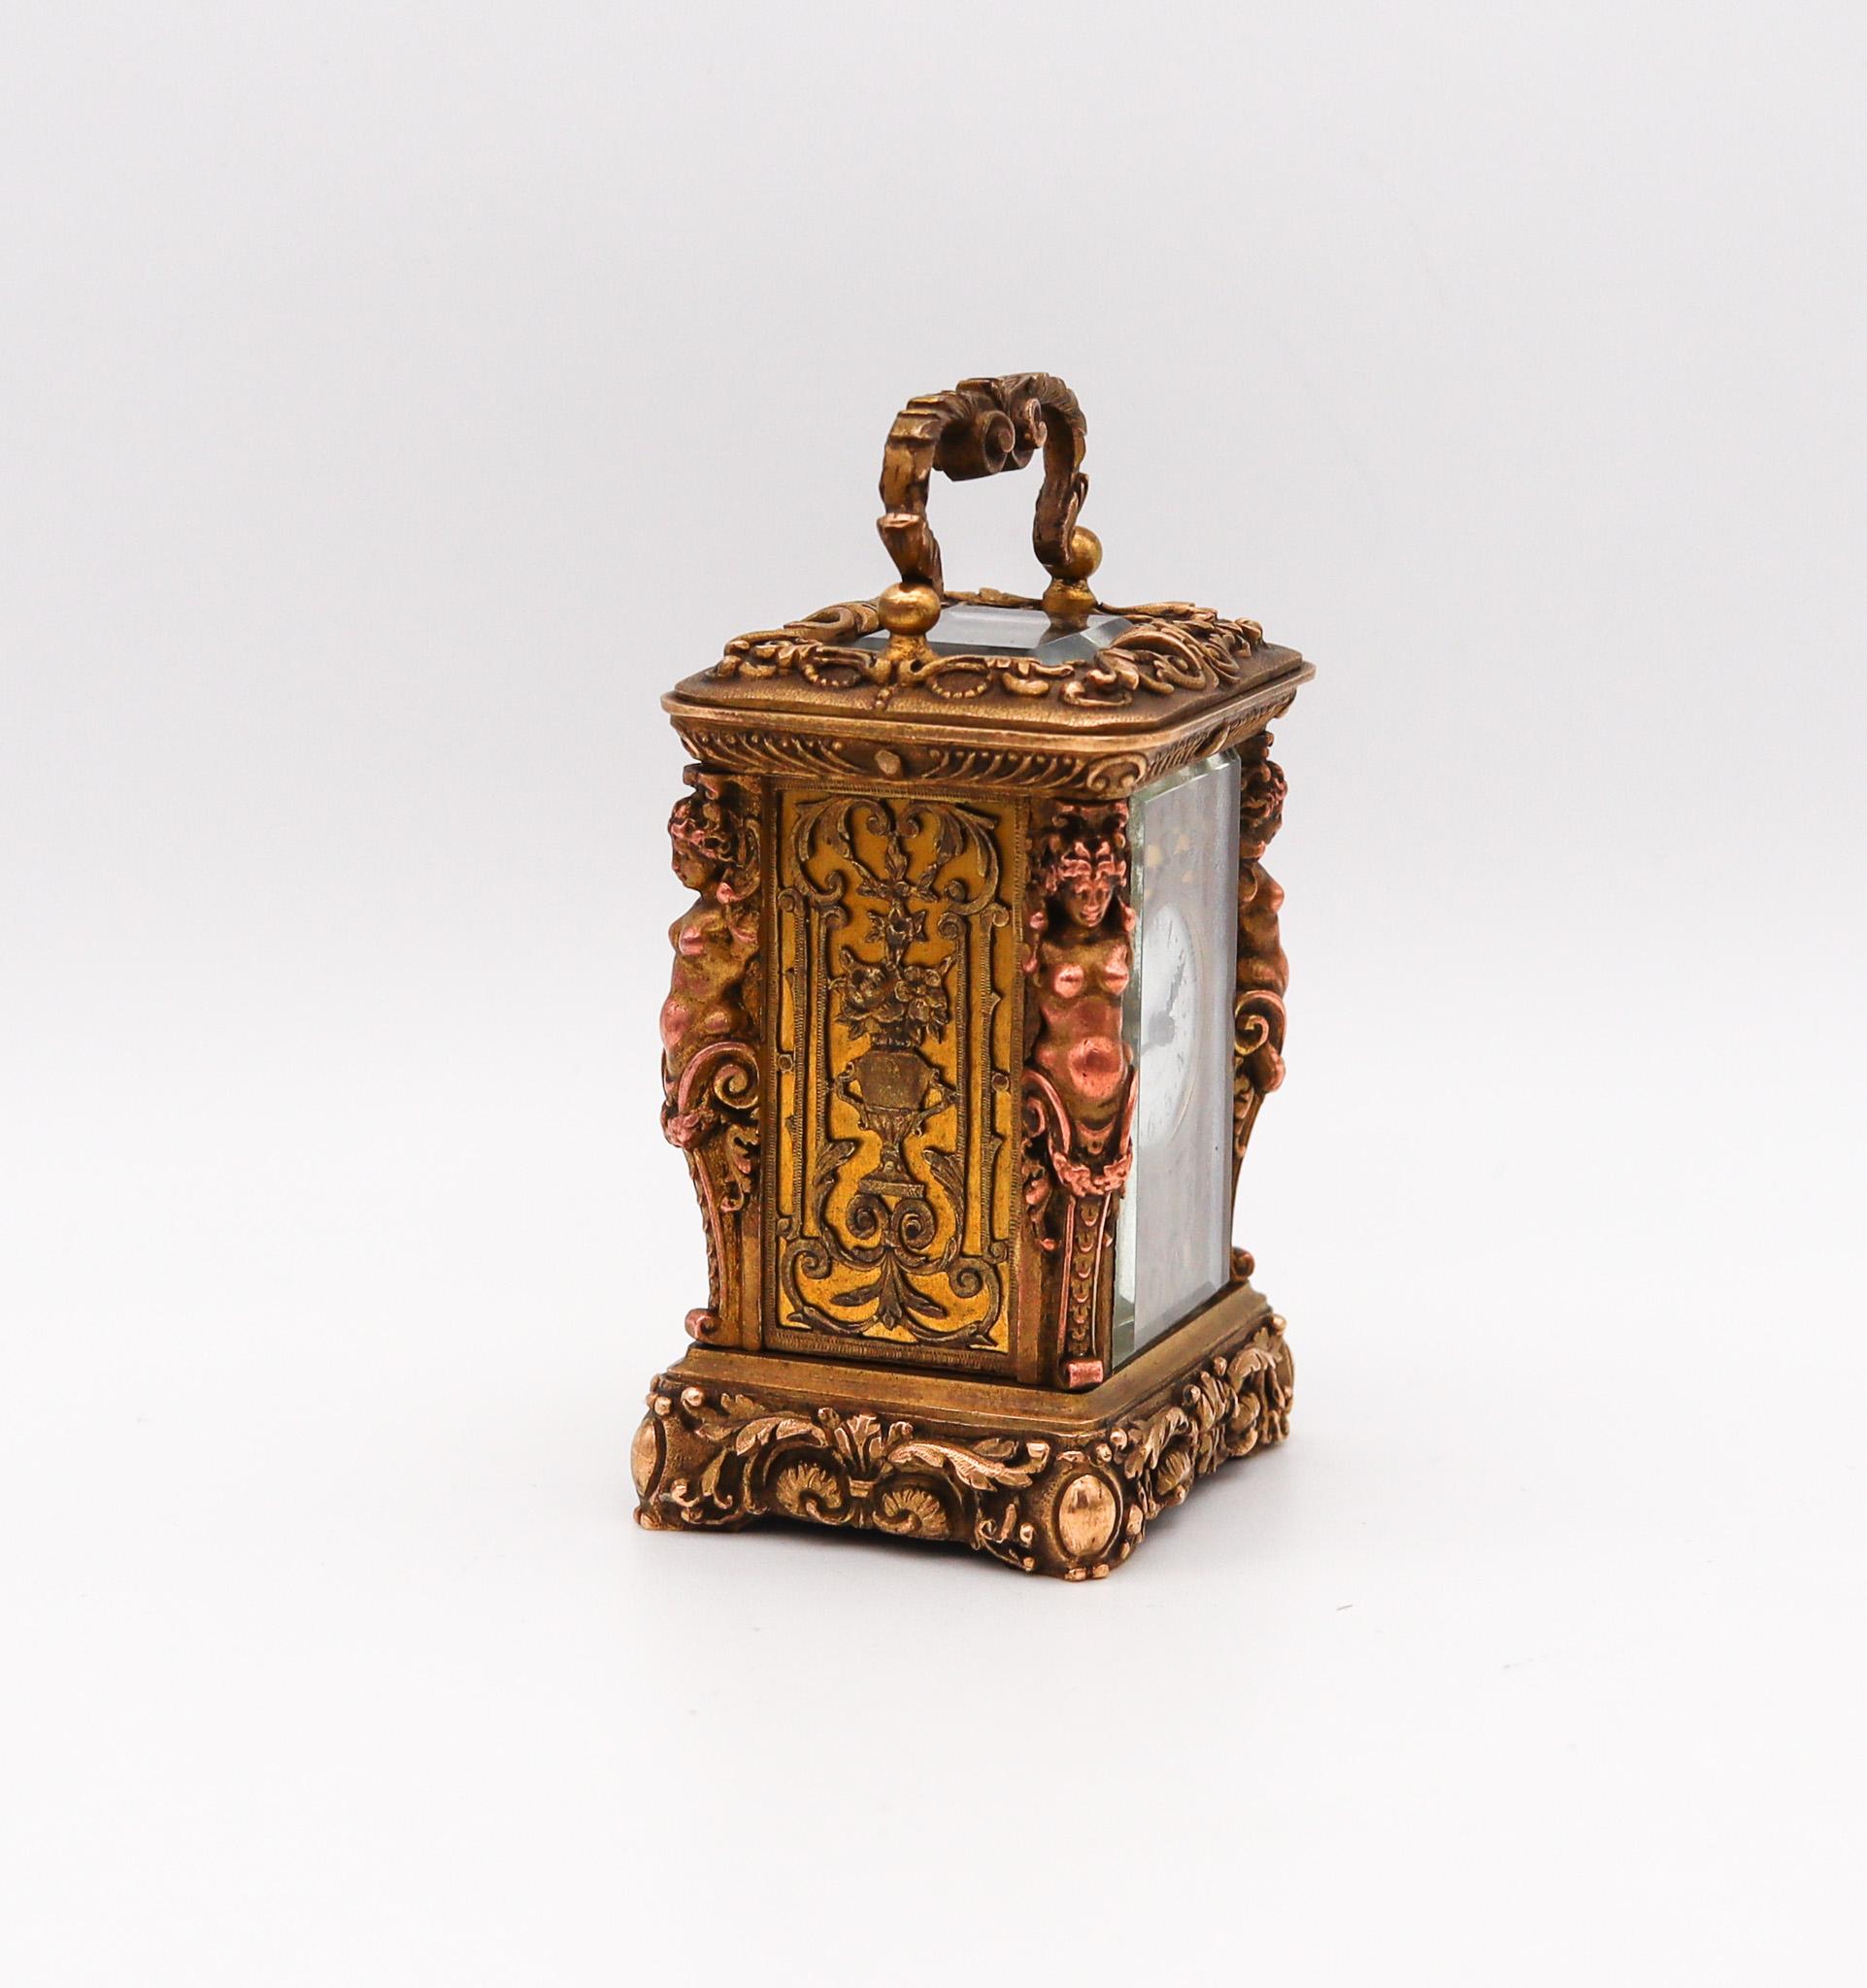 French miniature travel clock designed by Charles Hour

Beautiful miniature carriage travel clock, created in Paris France by the horologist Charles Hour for William Ward & Sons company. Crafted in the baroque style in solid bronze ormolu with three